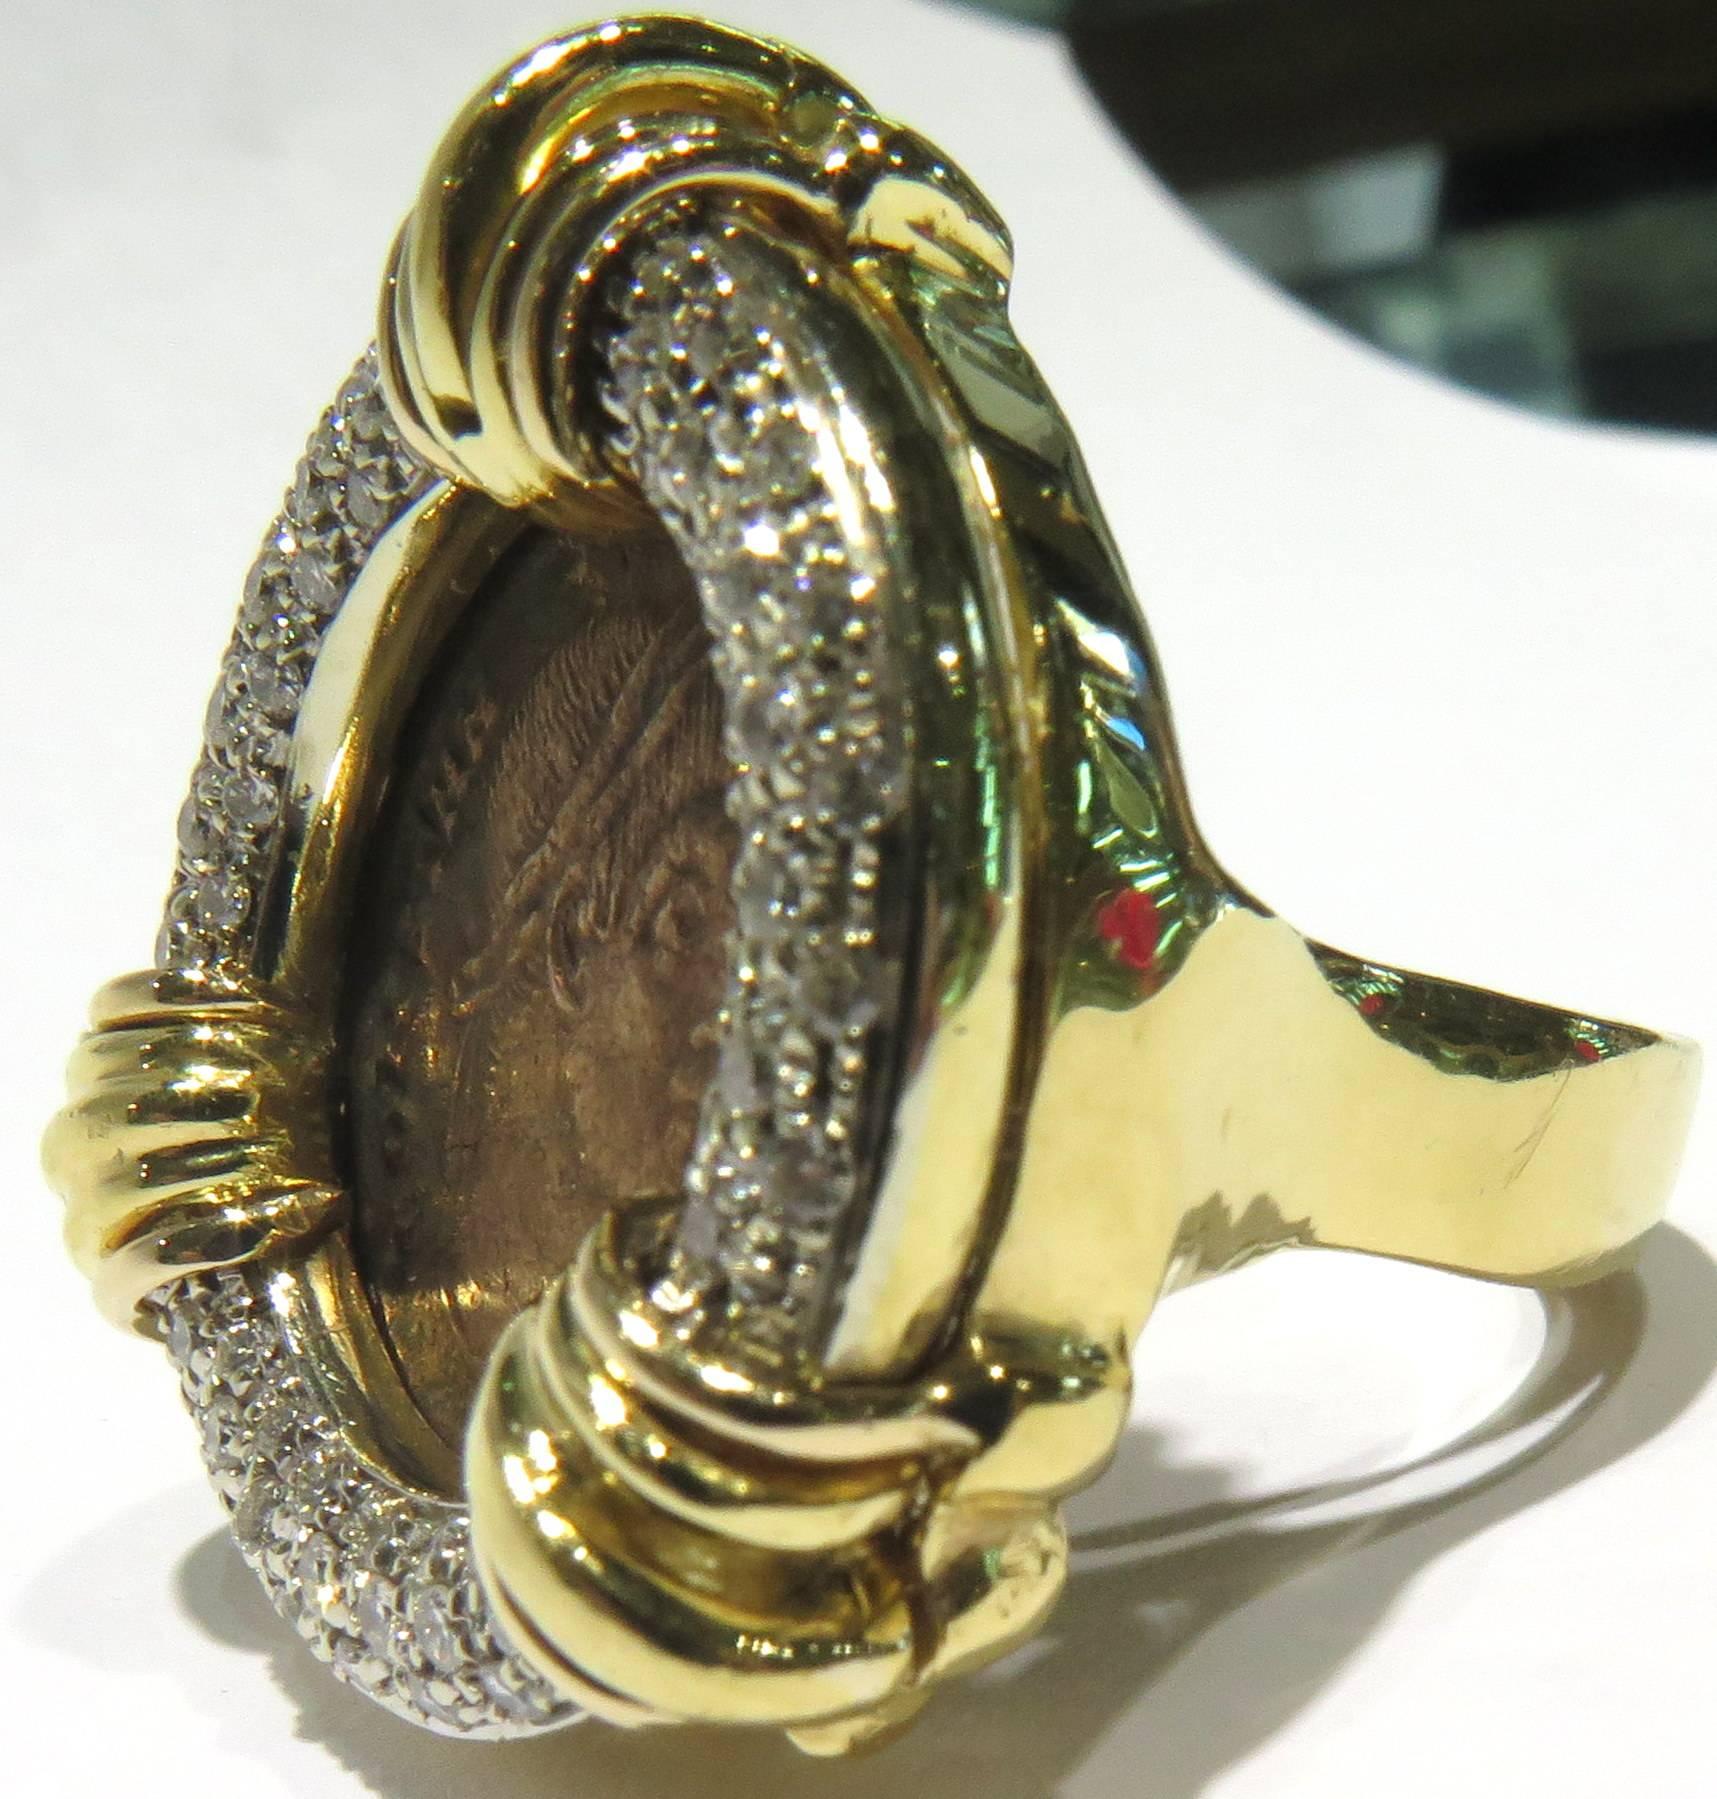 This amazing ring is a real show stopper. The oversized diamond tubular bezel adds to the dramatic effect of the ancient bronze coin. This ring is set in 18k yellow and white gold. The previous owner had a butterfly seizer put in for a working